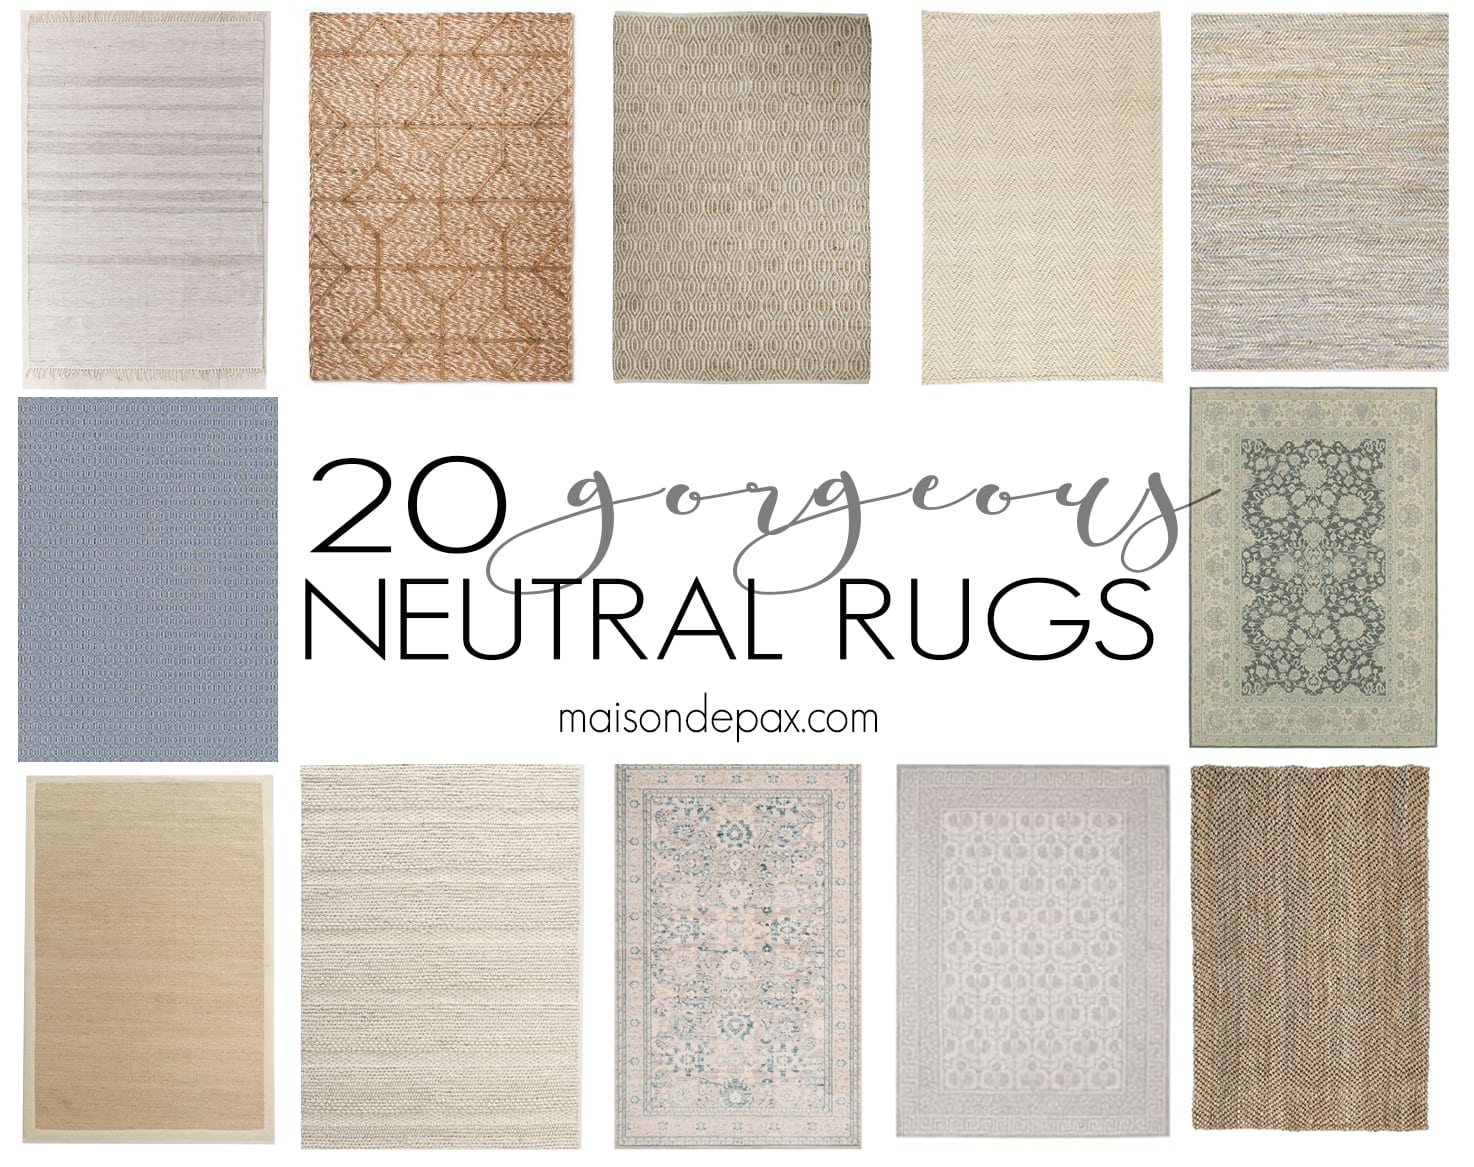 20 gorgeous neutral rugs! From traditional to modern, these neutral rugs are a great complement to any space. Bring in texture and beauty with one of these great finds.